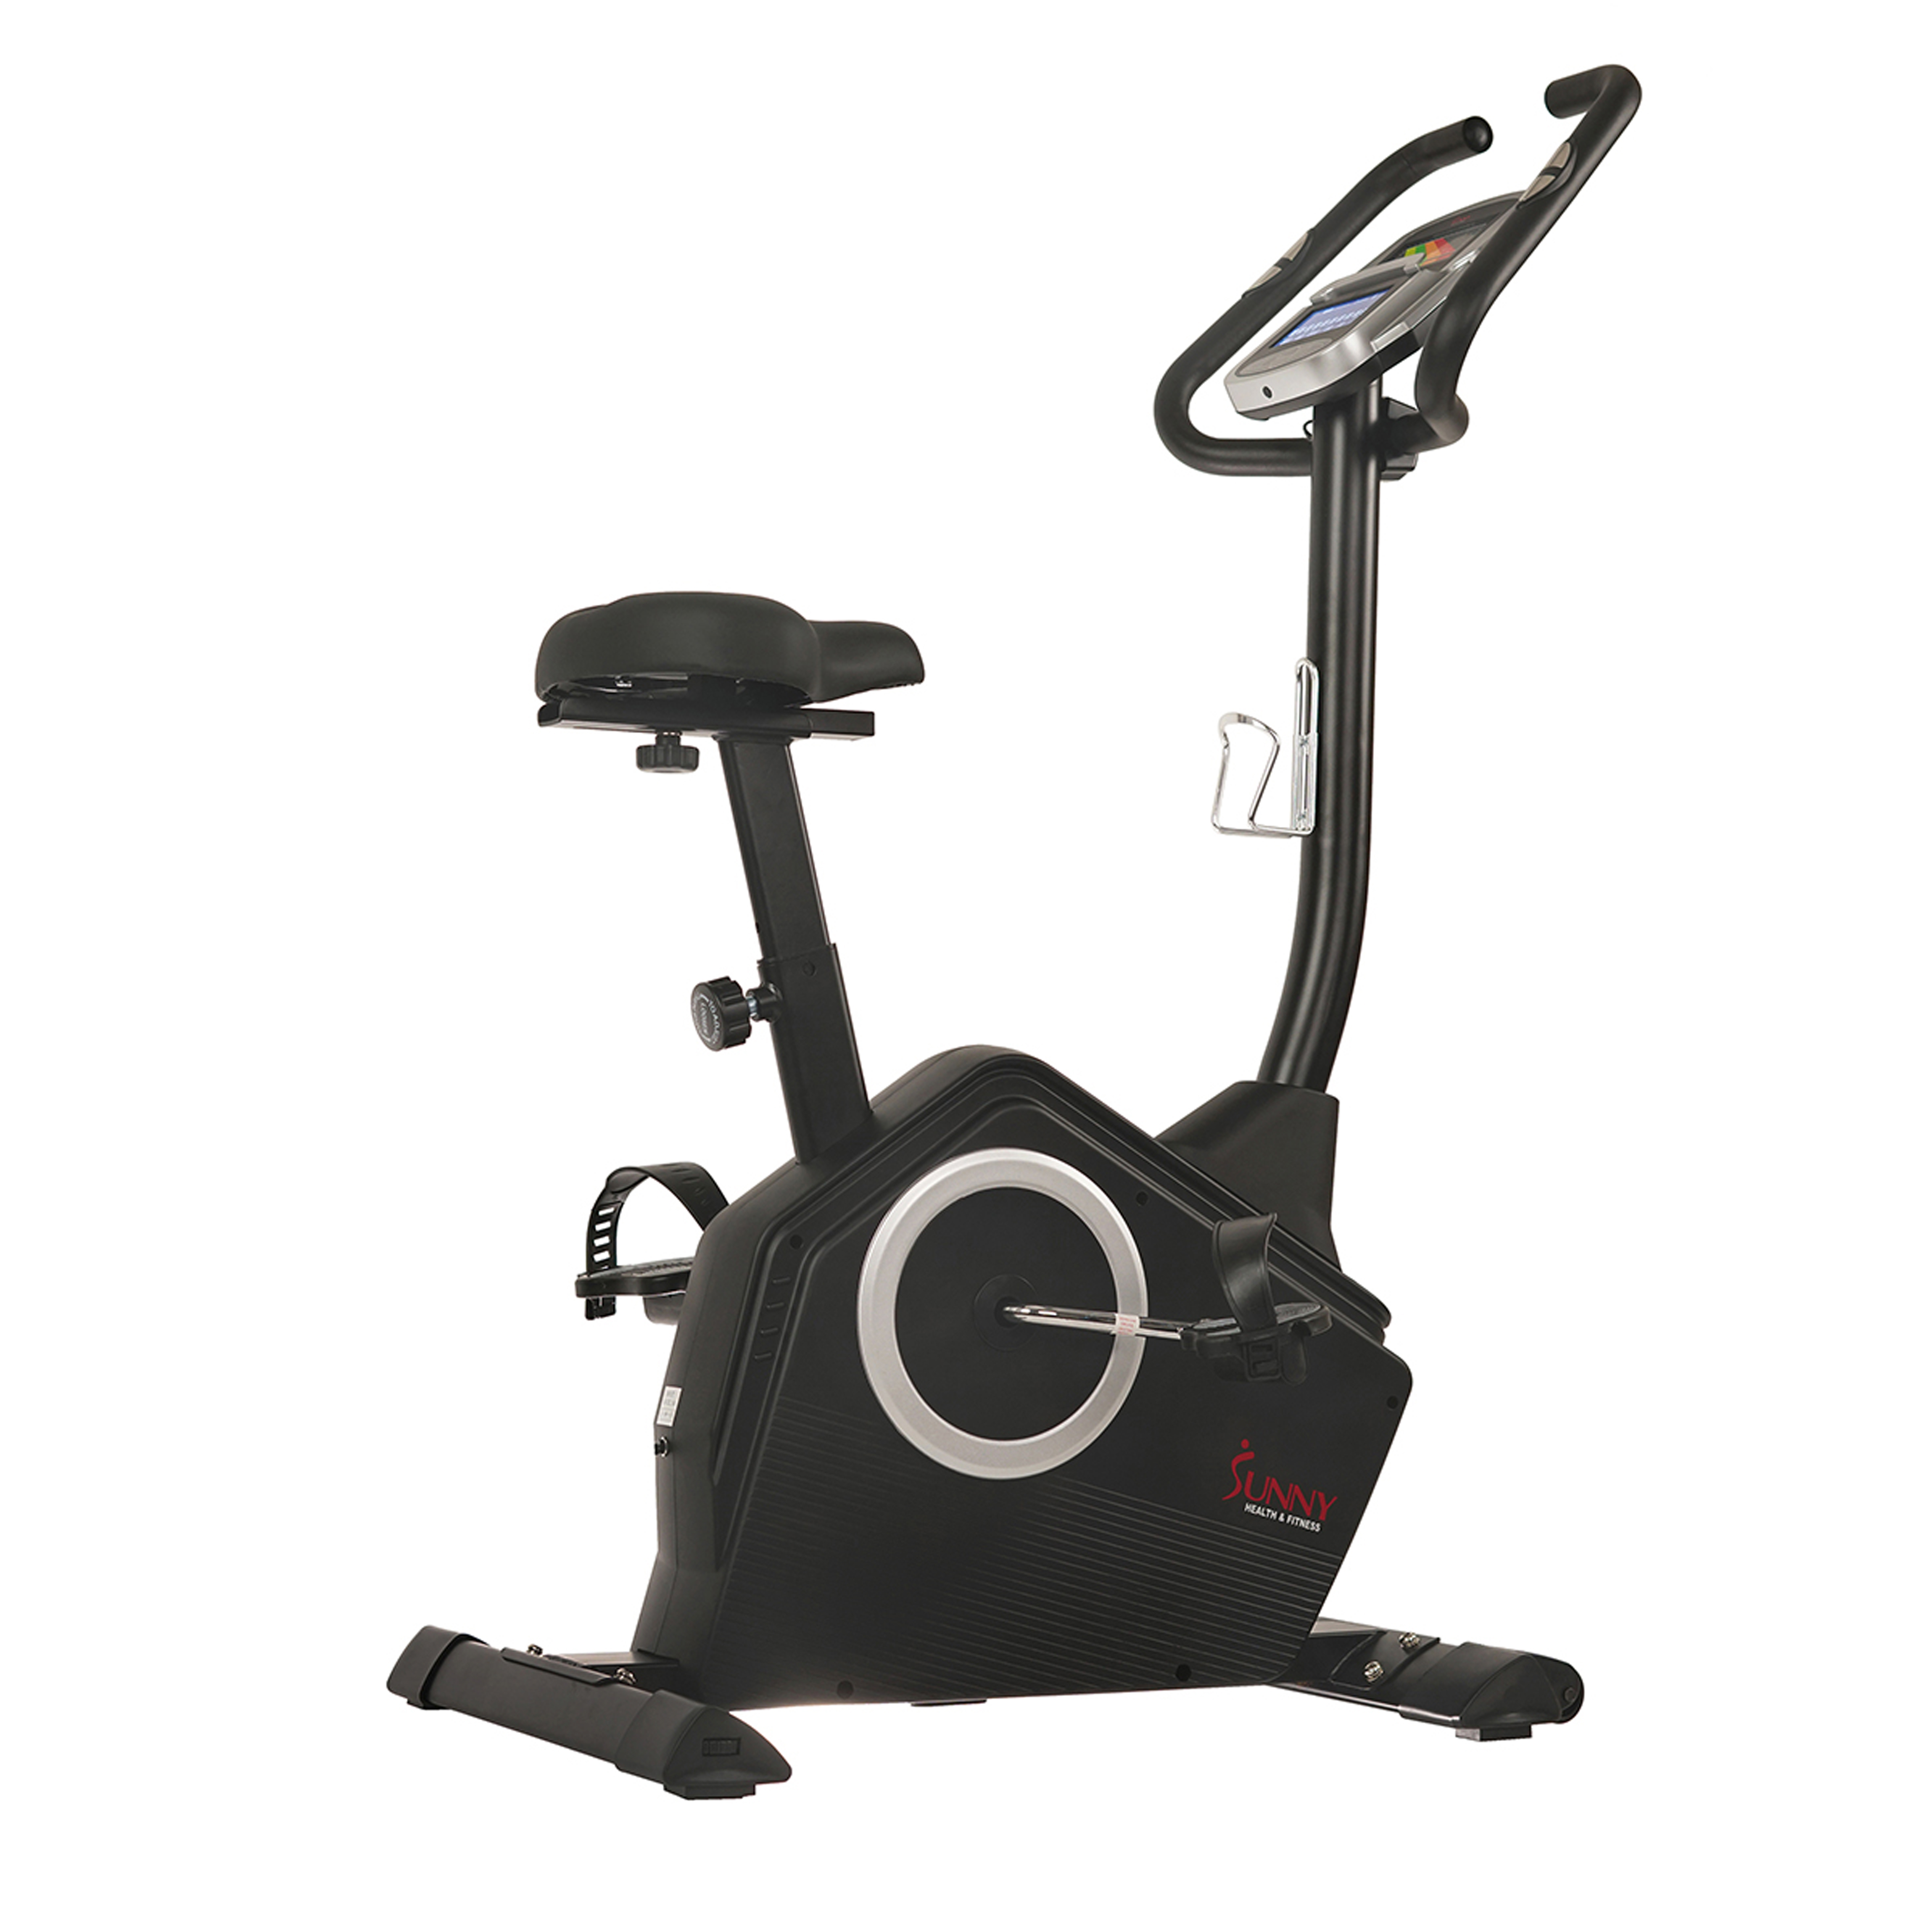 Sunny Health & Fitness Magnetic Upright Exercise Bike w/ LCD, Pulse Monitor, Stationary Cycling and Indoor Home Workouts SF-B2883 - image 5 of 9